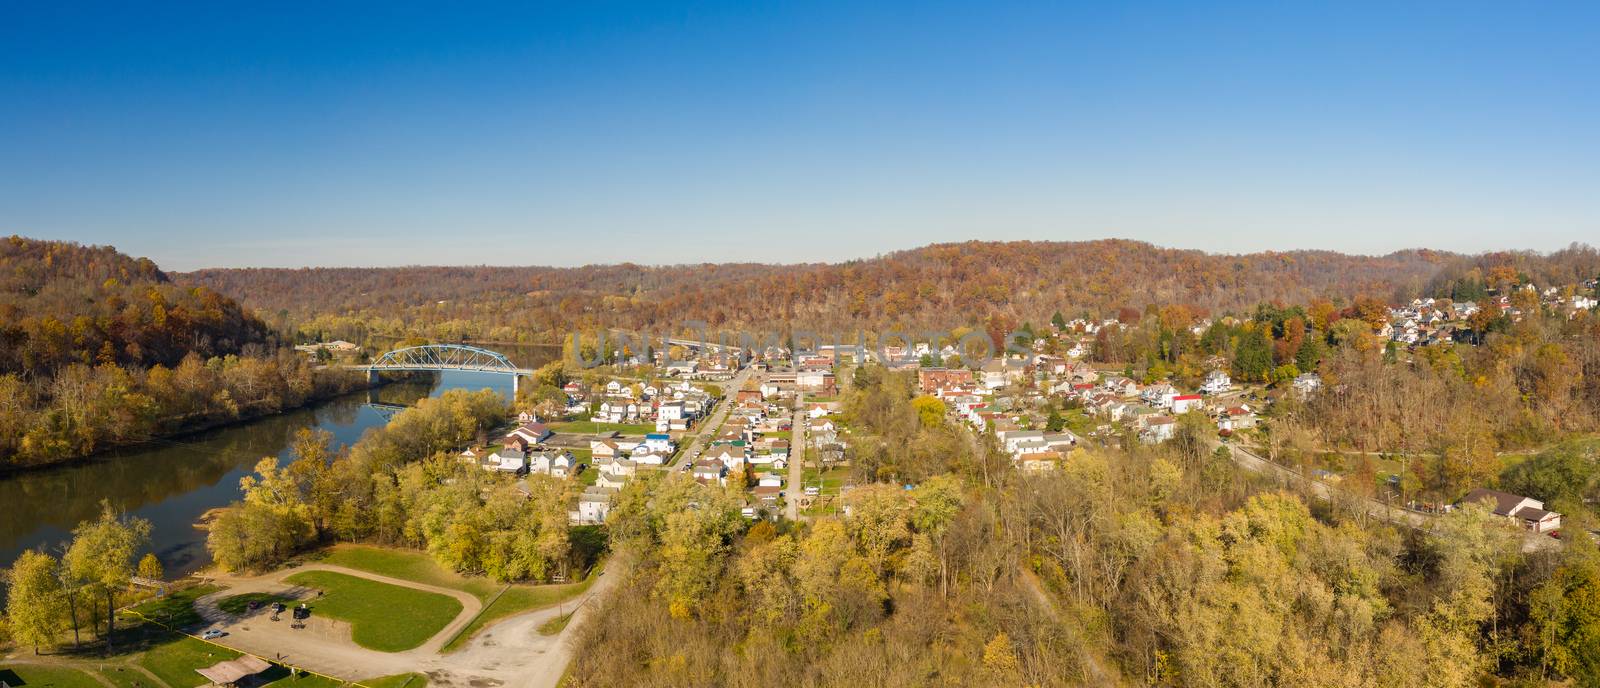 Aerial drone panorama of the downtown area of Point Marion in Pennsylvania by steheap